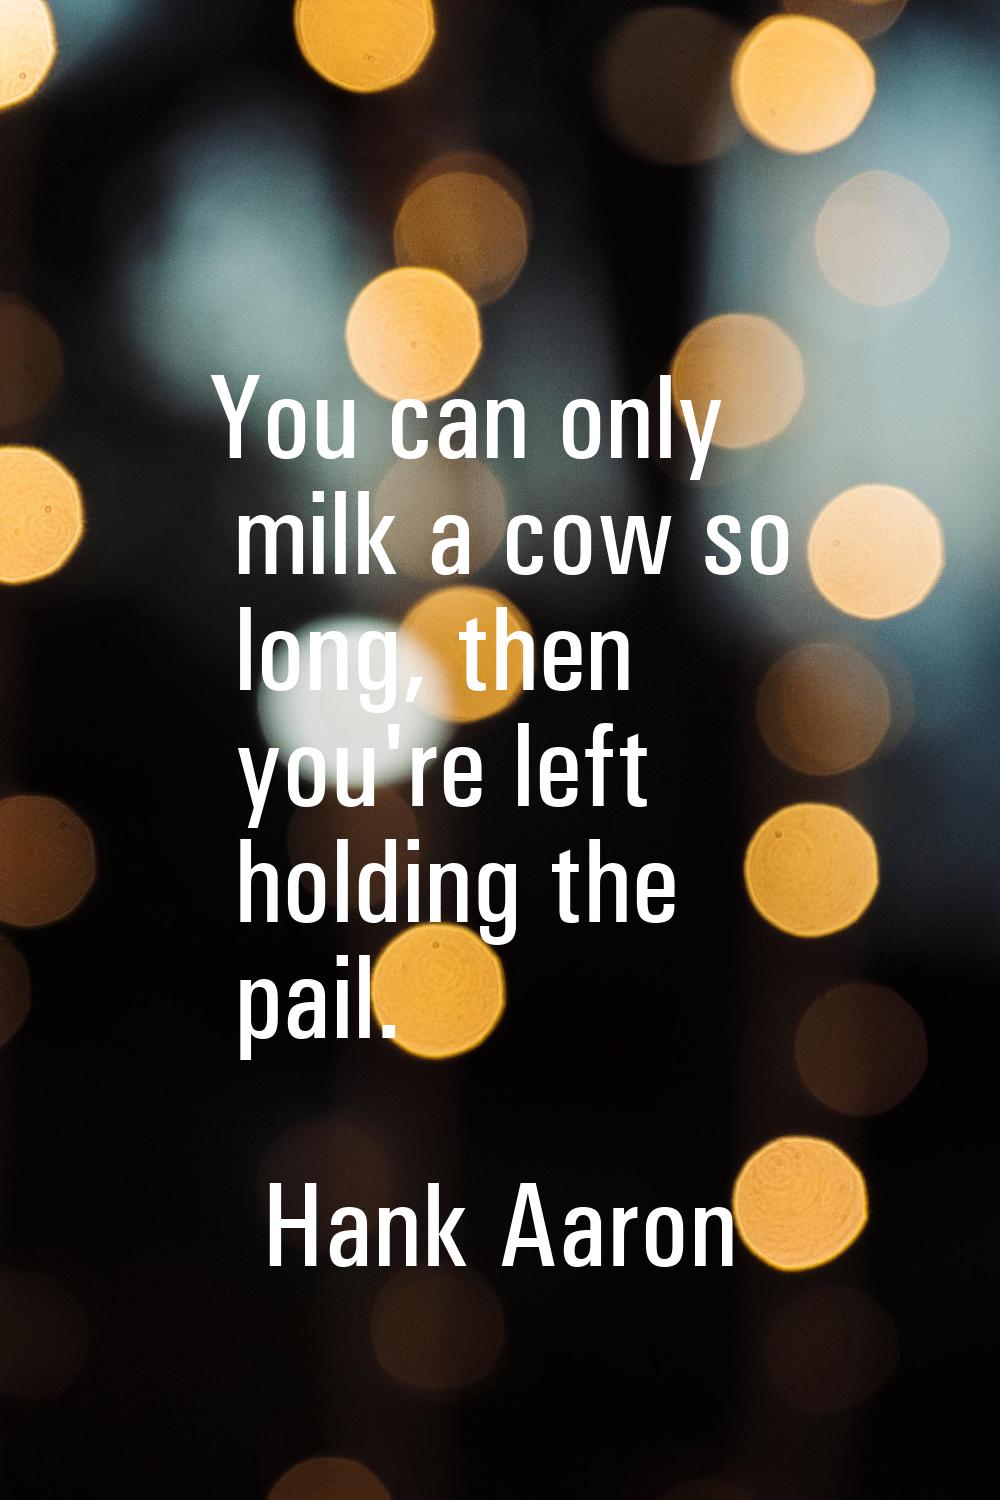 You can only milk a cow so long, then you're left holding the pail.